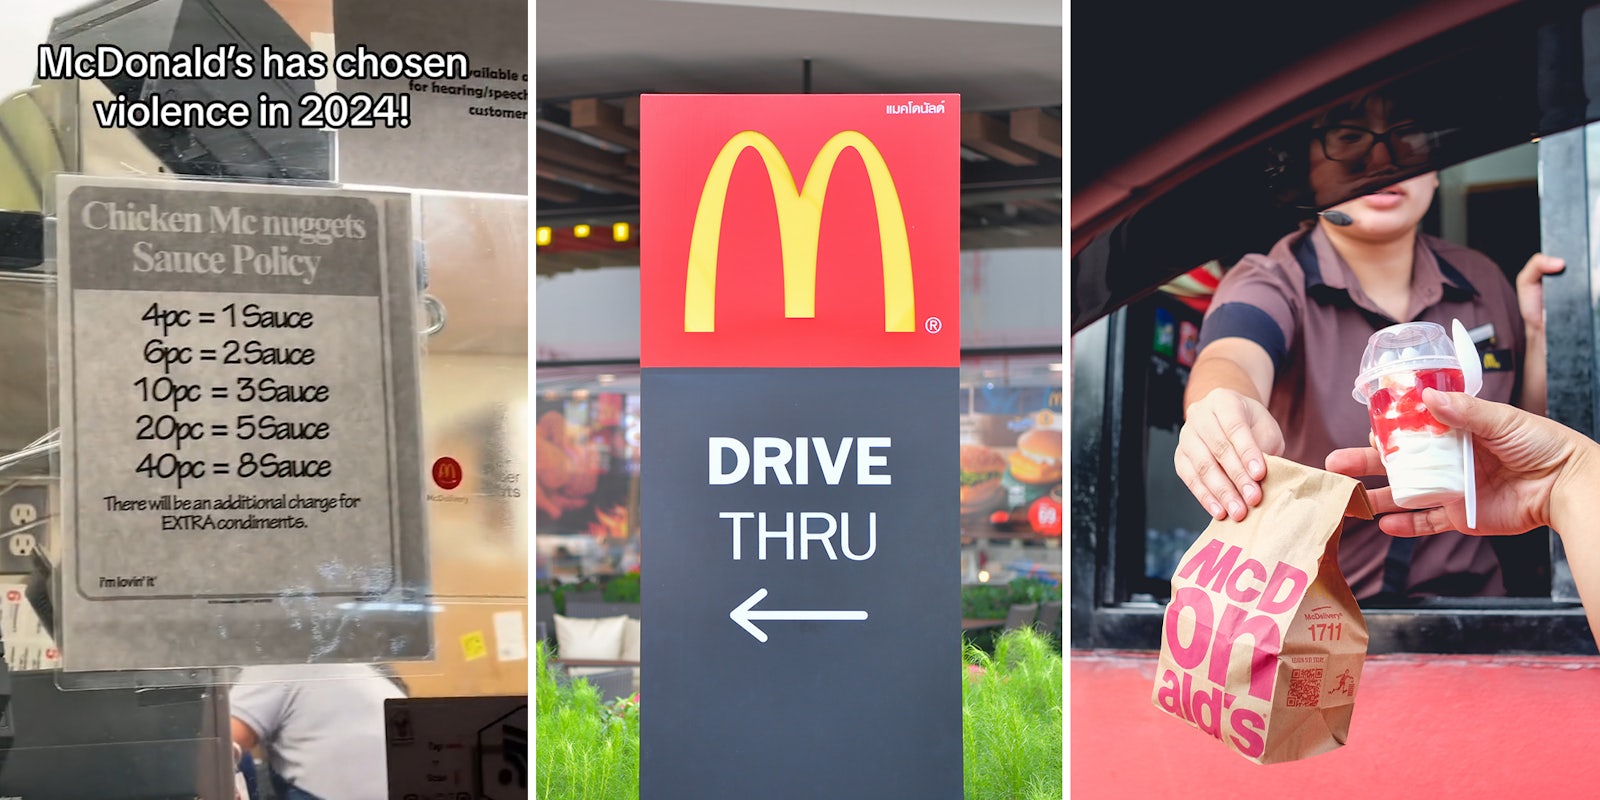 McDonald's drive-thru customer catches store rationing sauces based on meal sizes